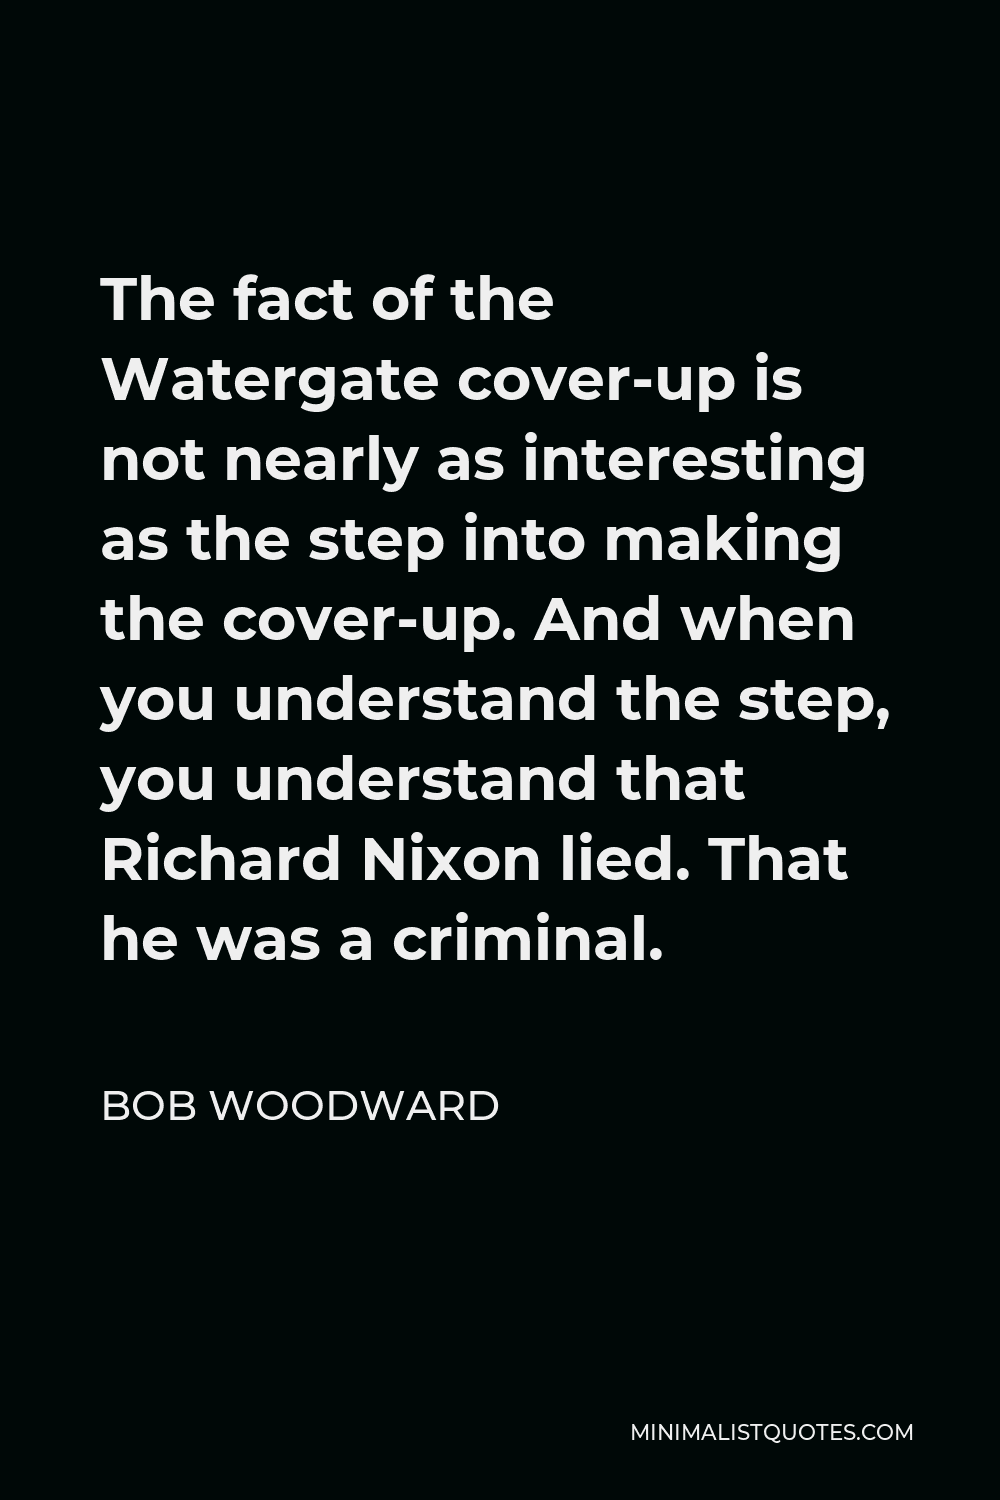 Bob Woodward Quote - The fact of the Watergate cover-up is not nearly as interesting as the step into making the cover-up. And when you understand the step, you understand that Richard Nixon lied. That he was a criminal.